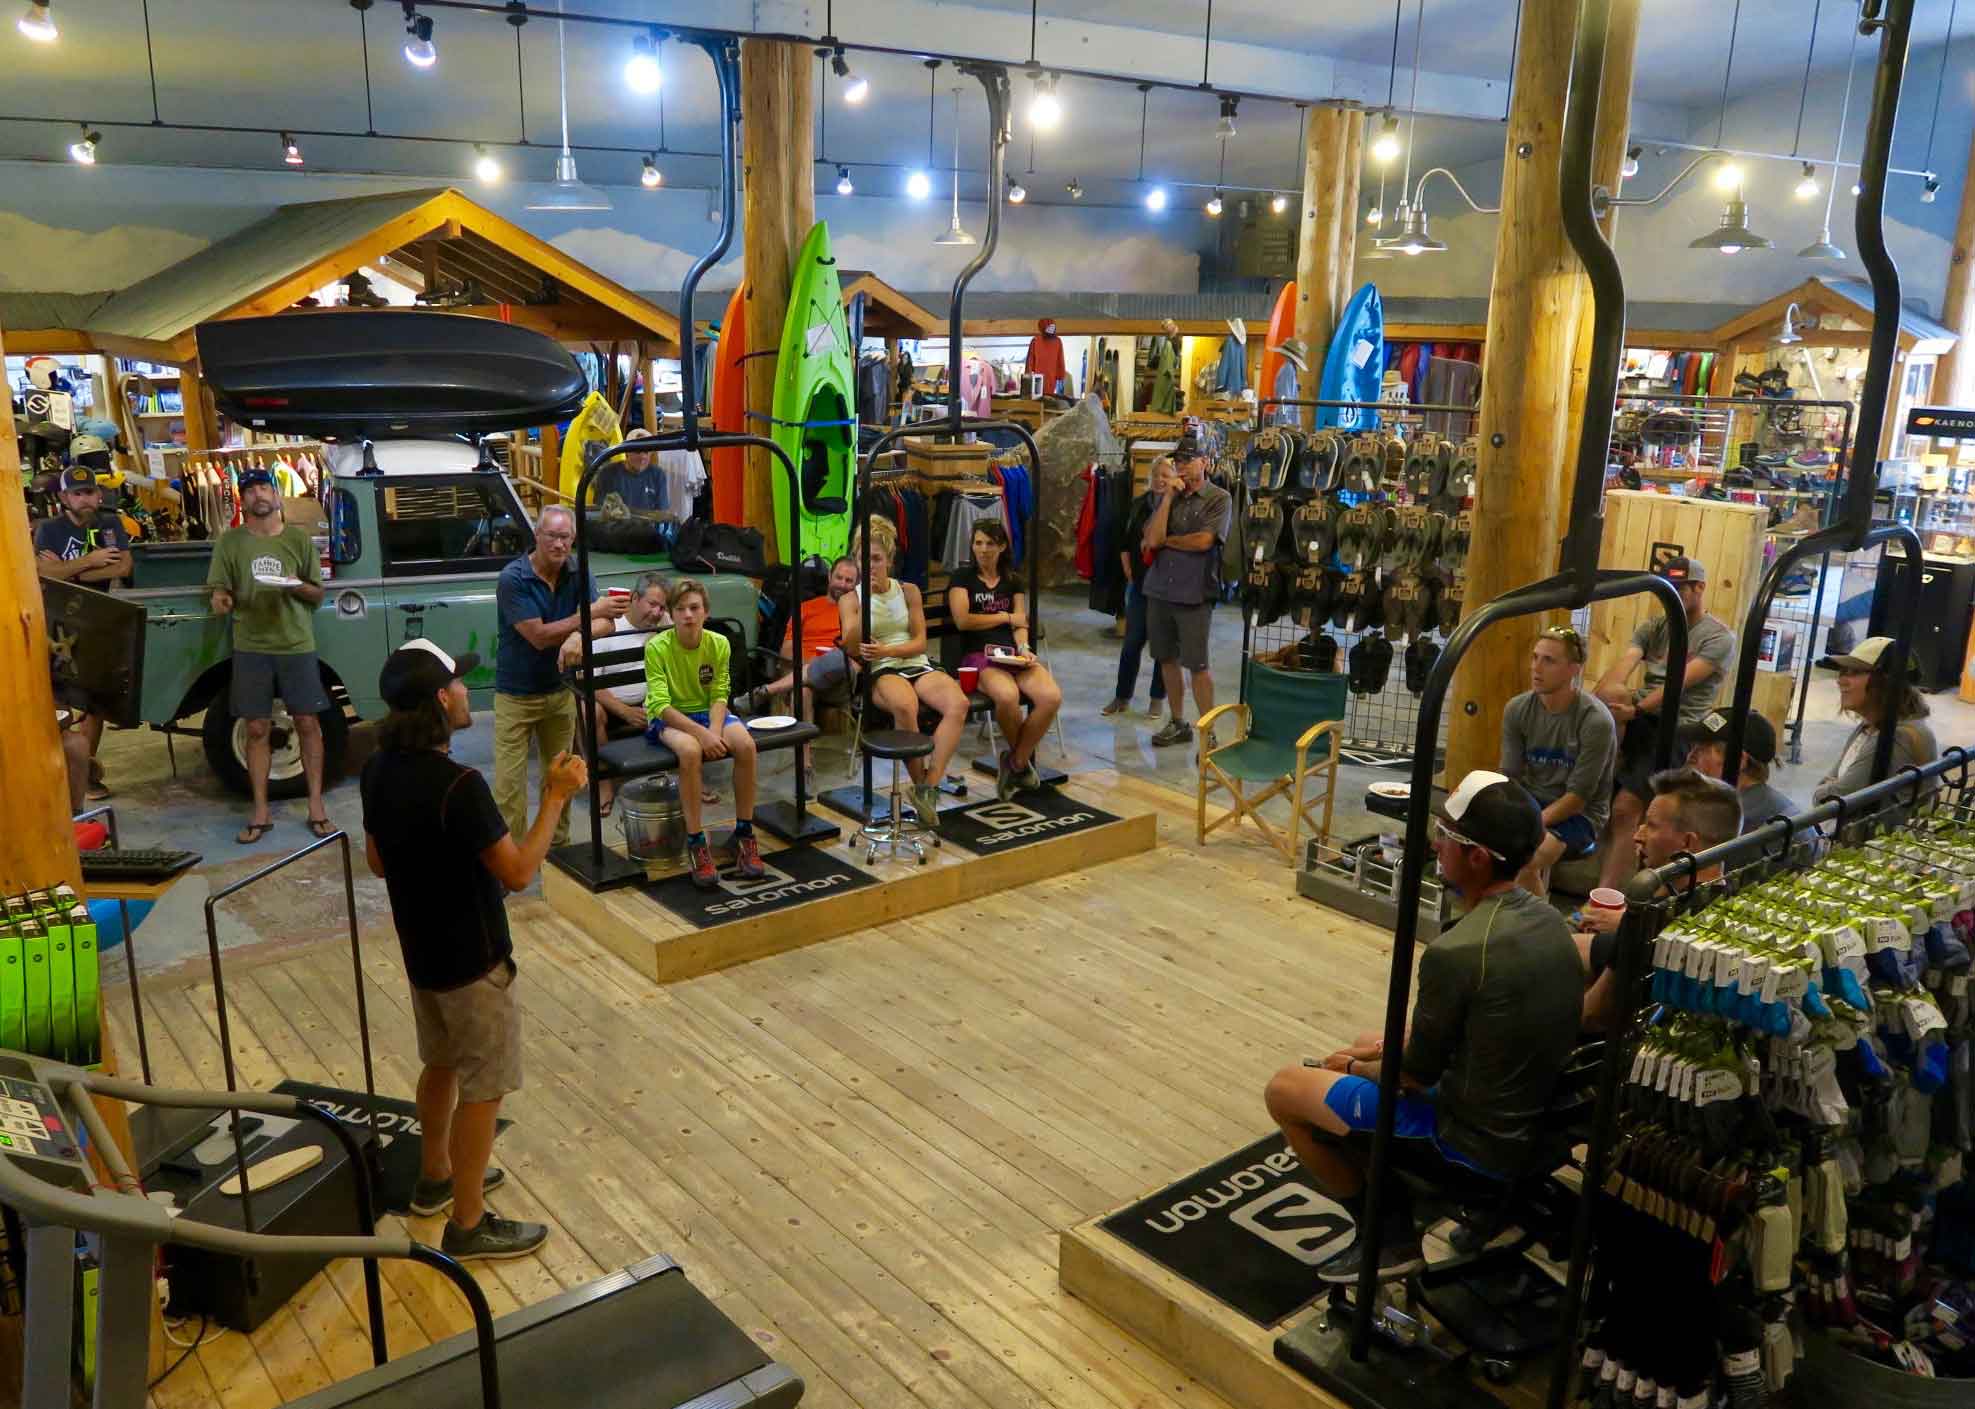 Zach Bitter Altra Shoes talking to crowd at Granite Chief Ski & Mtn Shop.